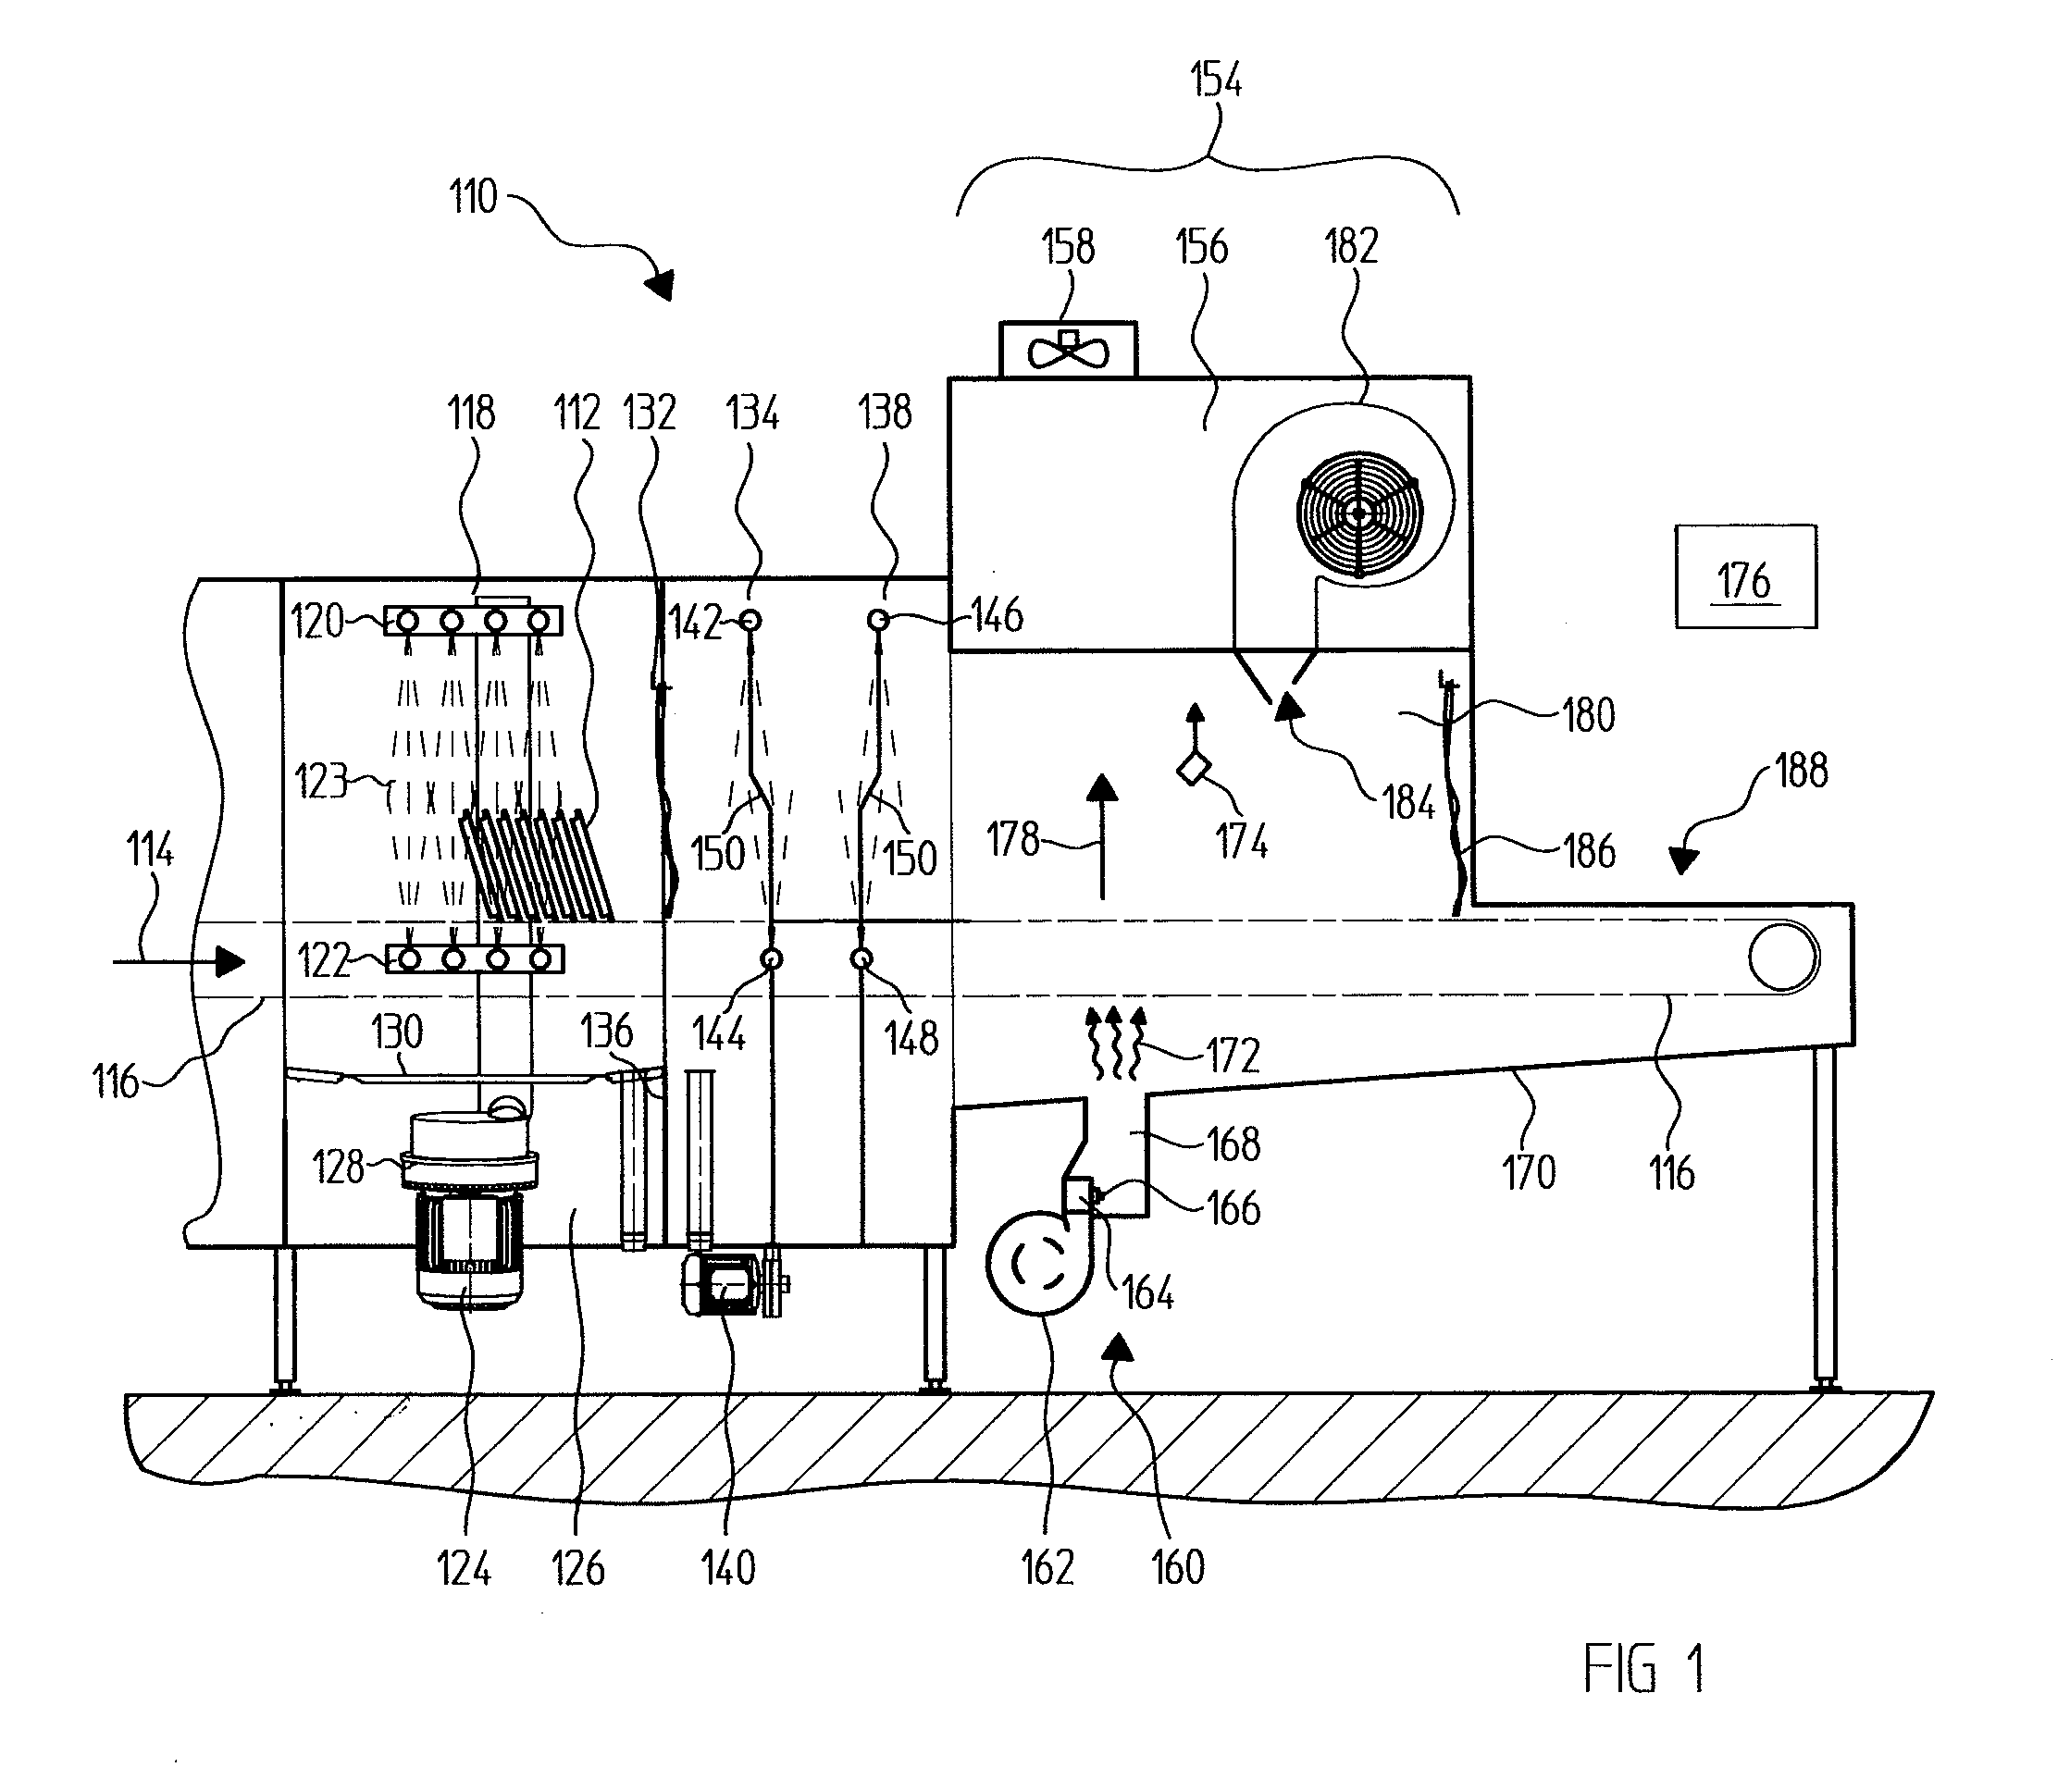 Cleaning appliance comprising a microwave drying system